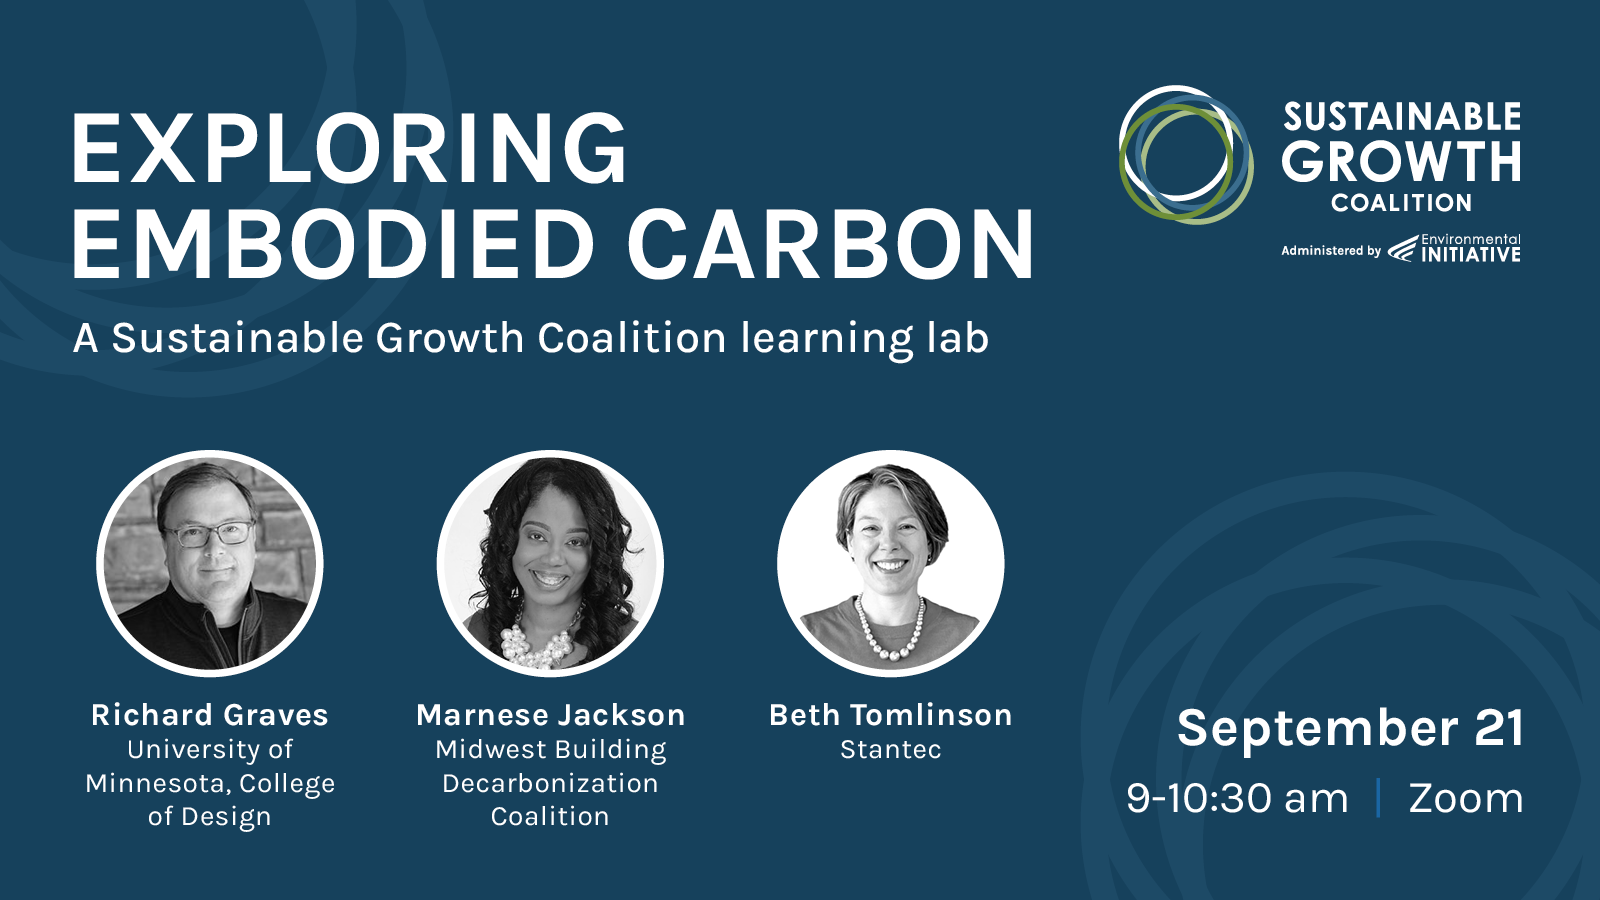 Dark blue background with headshots of Richard Graves, Marnese Jackson, and Beth Tomlinson. Text over image reads: Exploring embodied carbon.